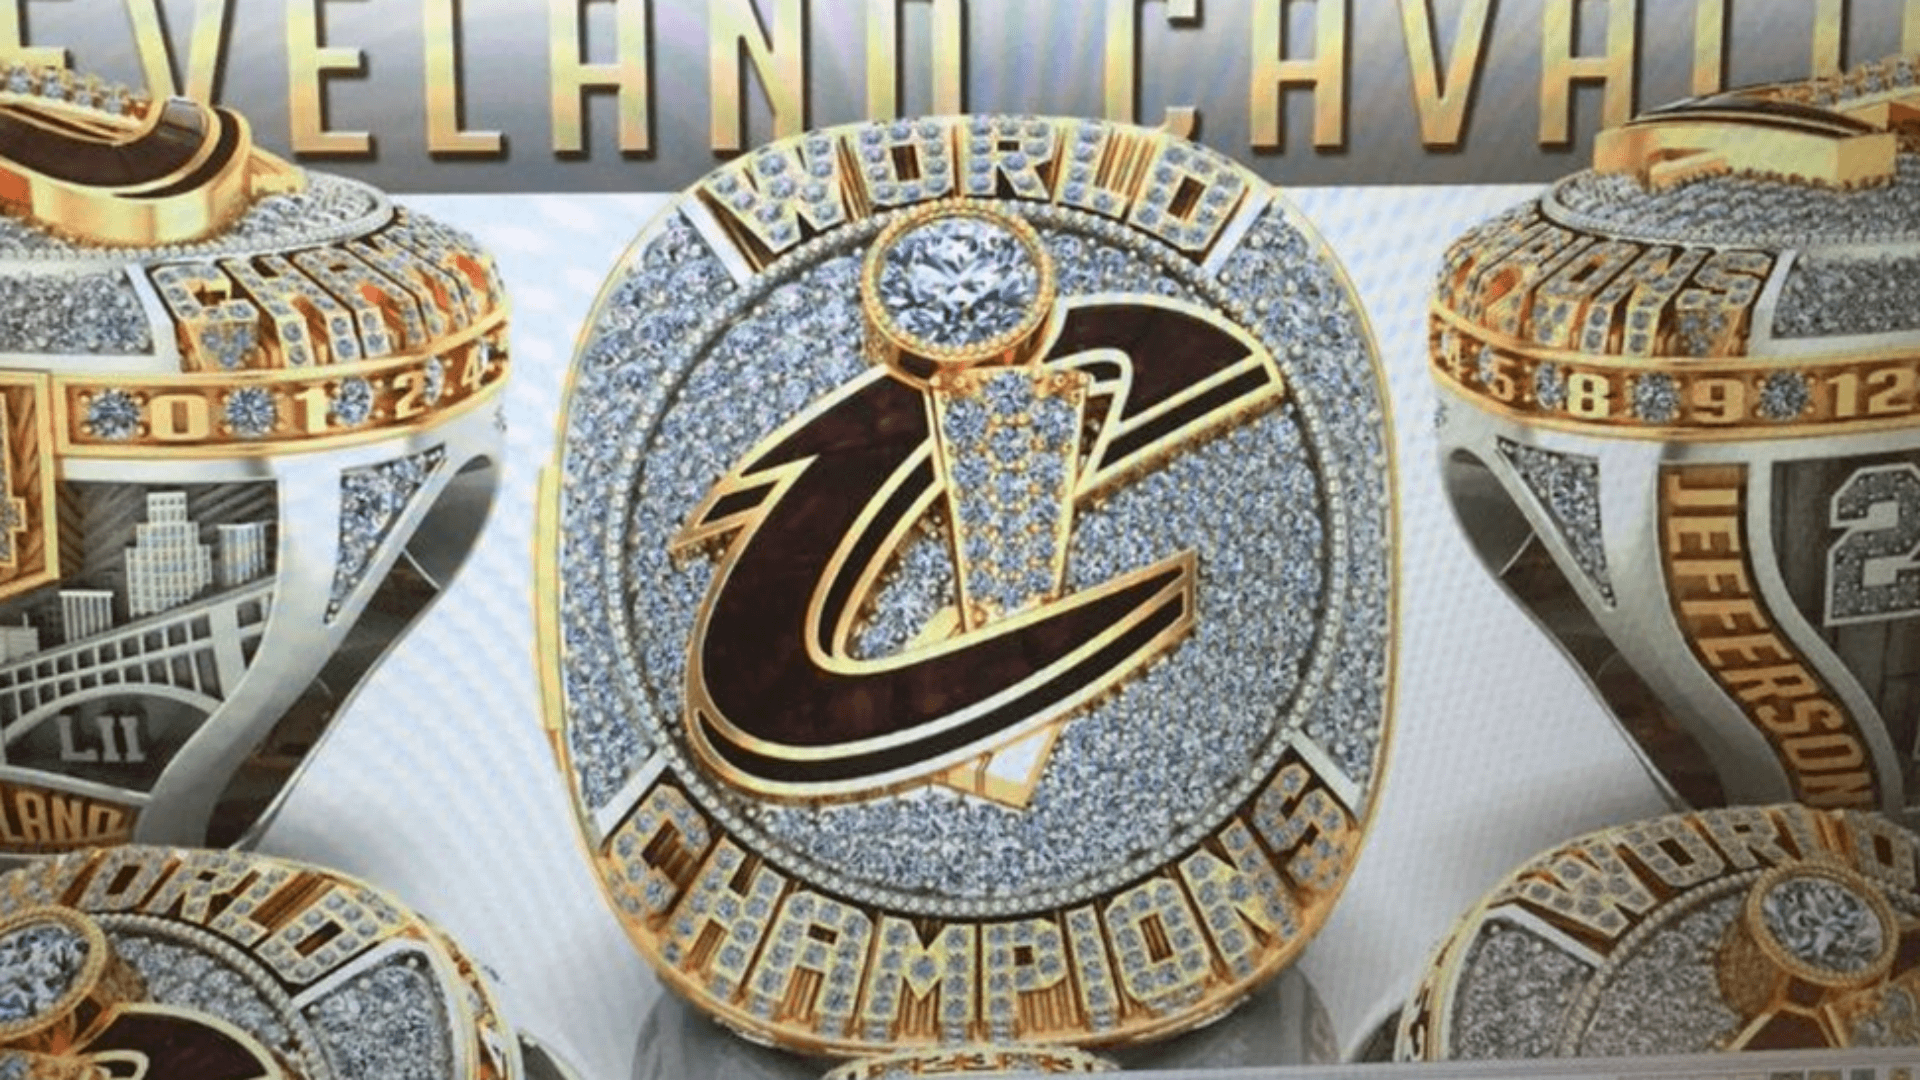 Take a look at the Cavaliers' championship rings